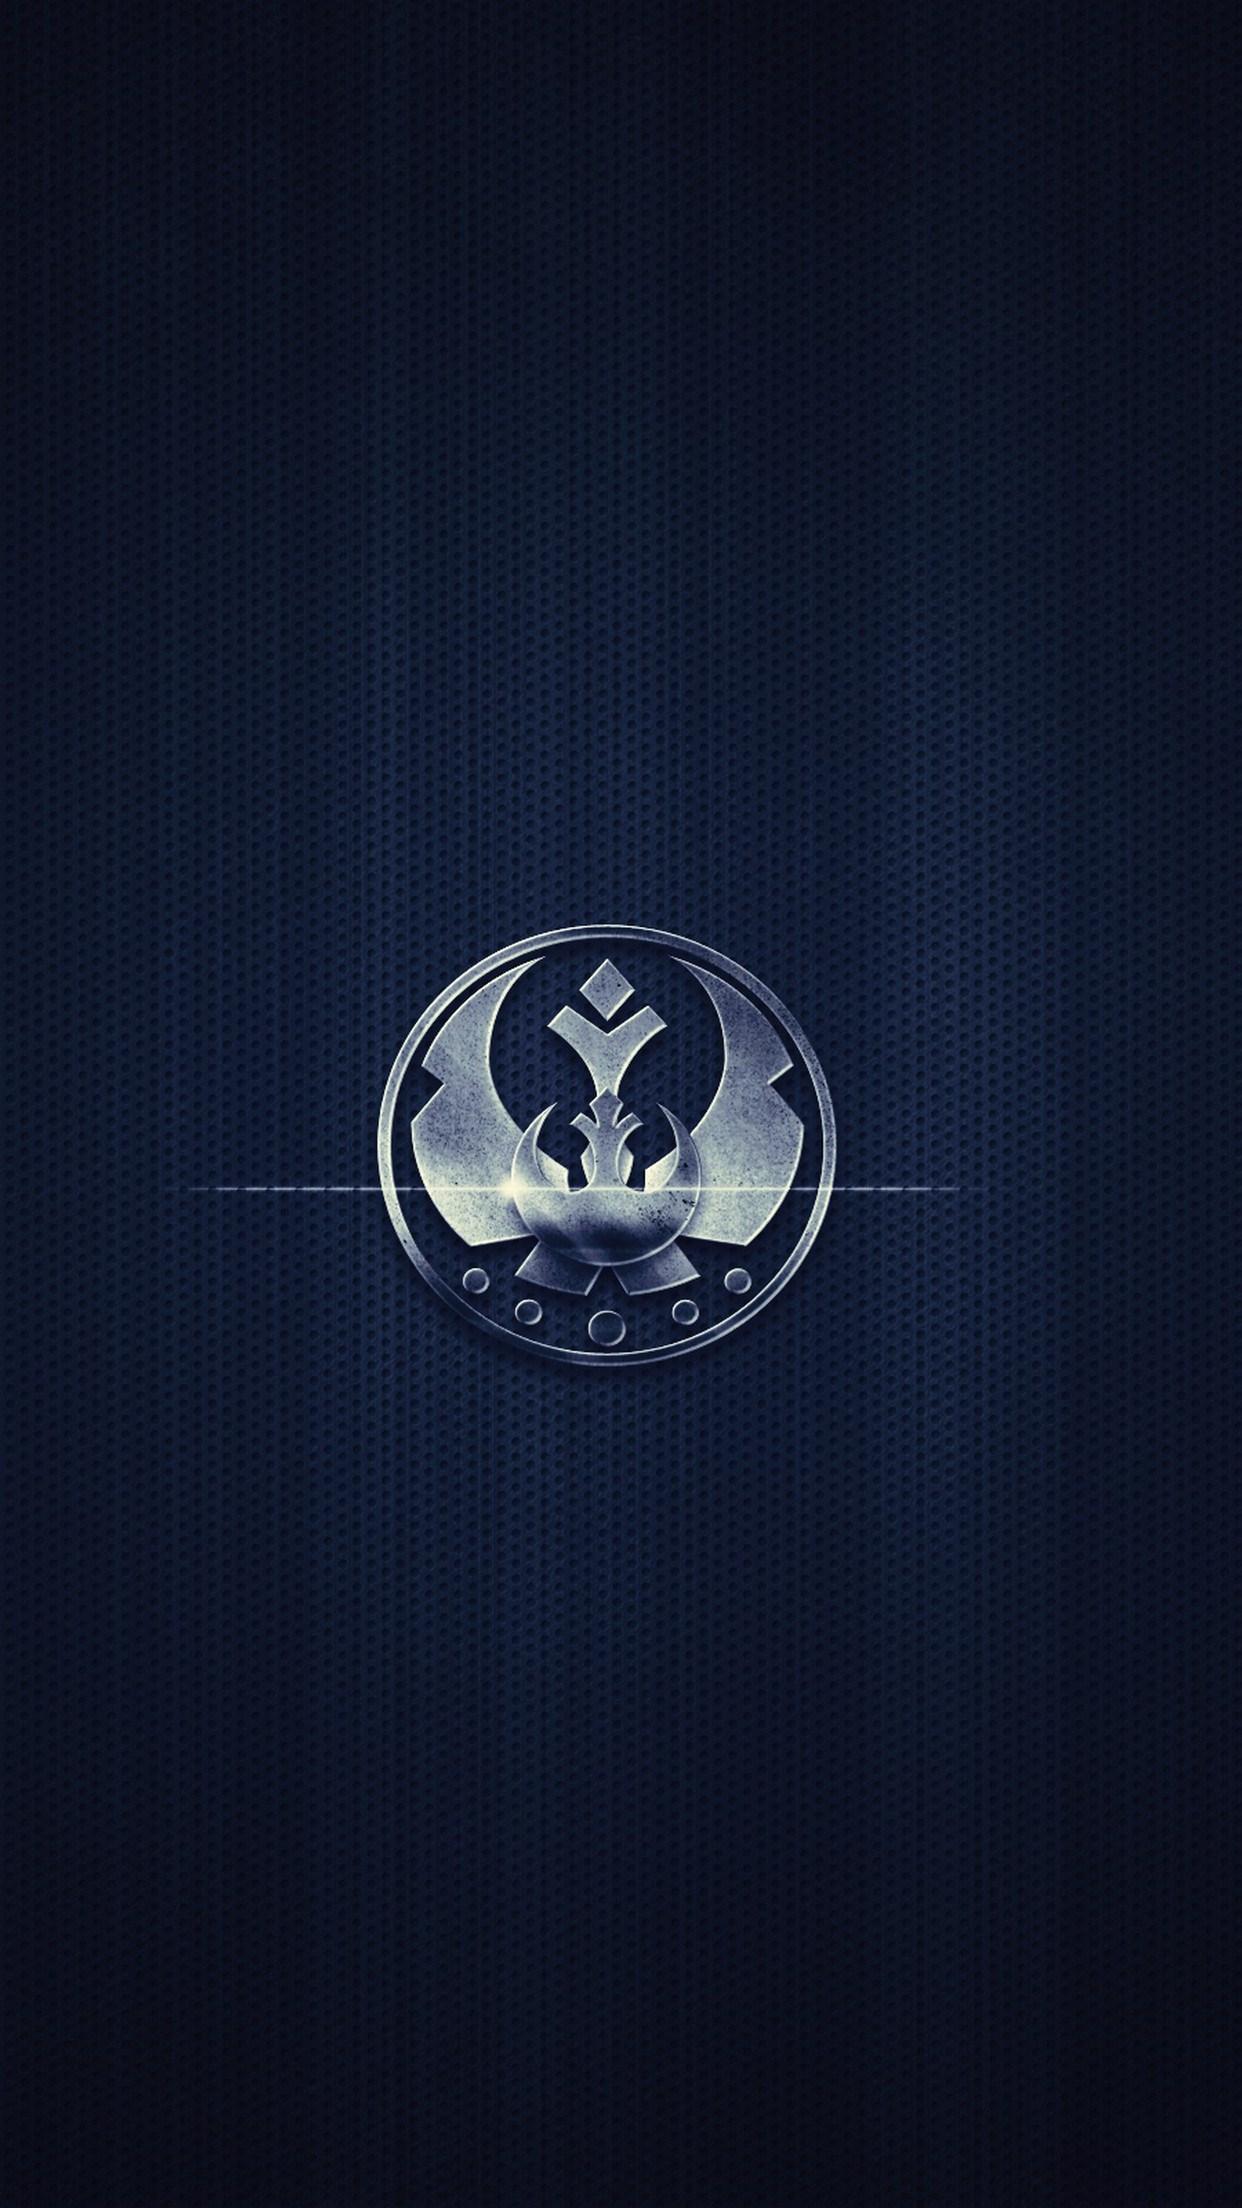 With these mobile wallpaper, the force will be with you